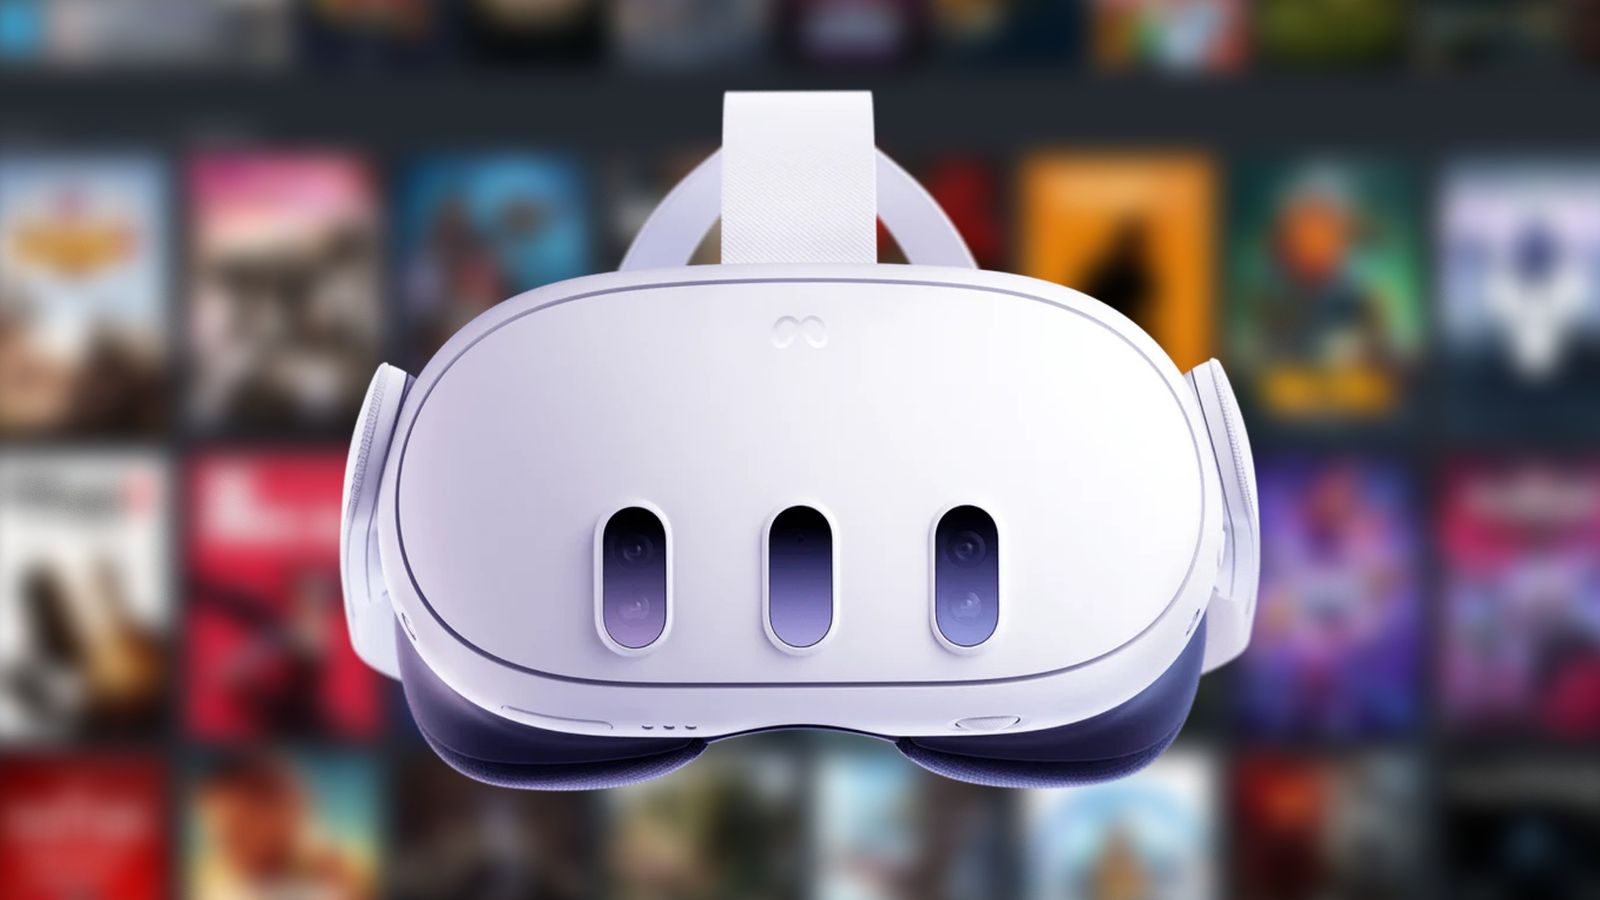 Meta Quest 3 headset in front of a Steam library page which is blurred